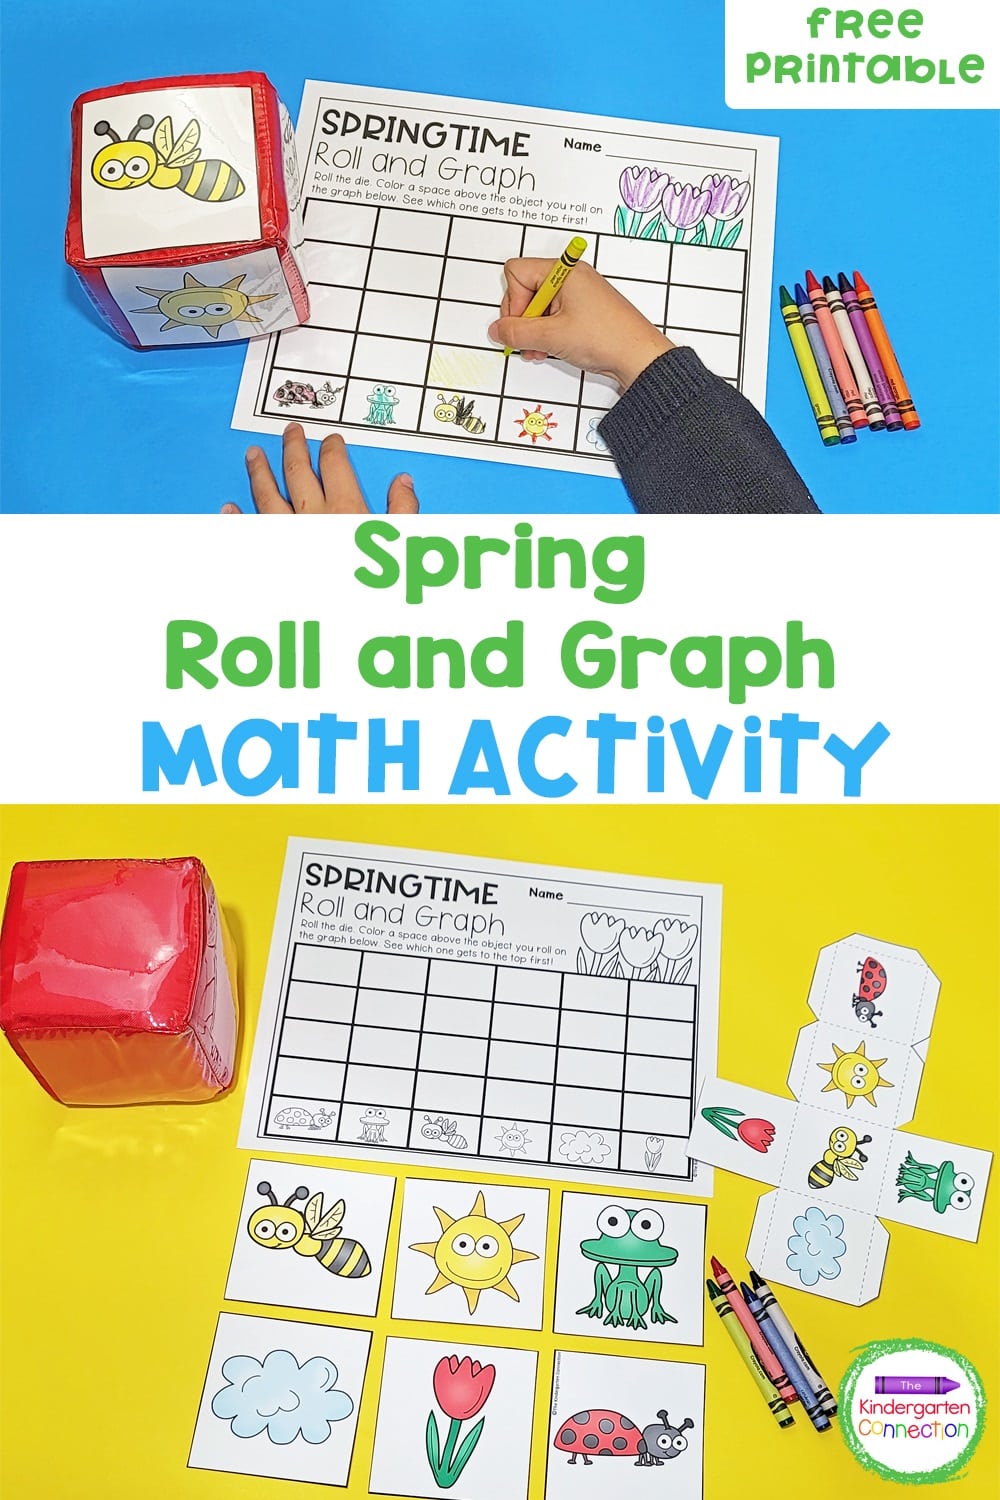 Roll and Graph Spring Math Activity